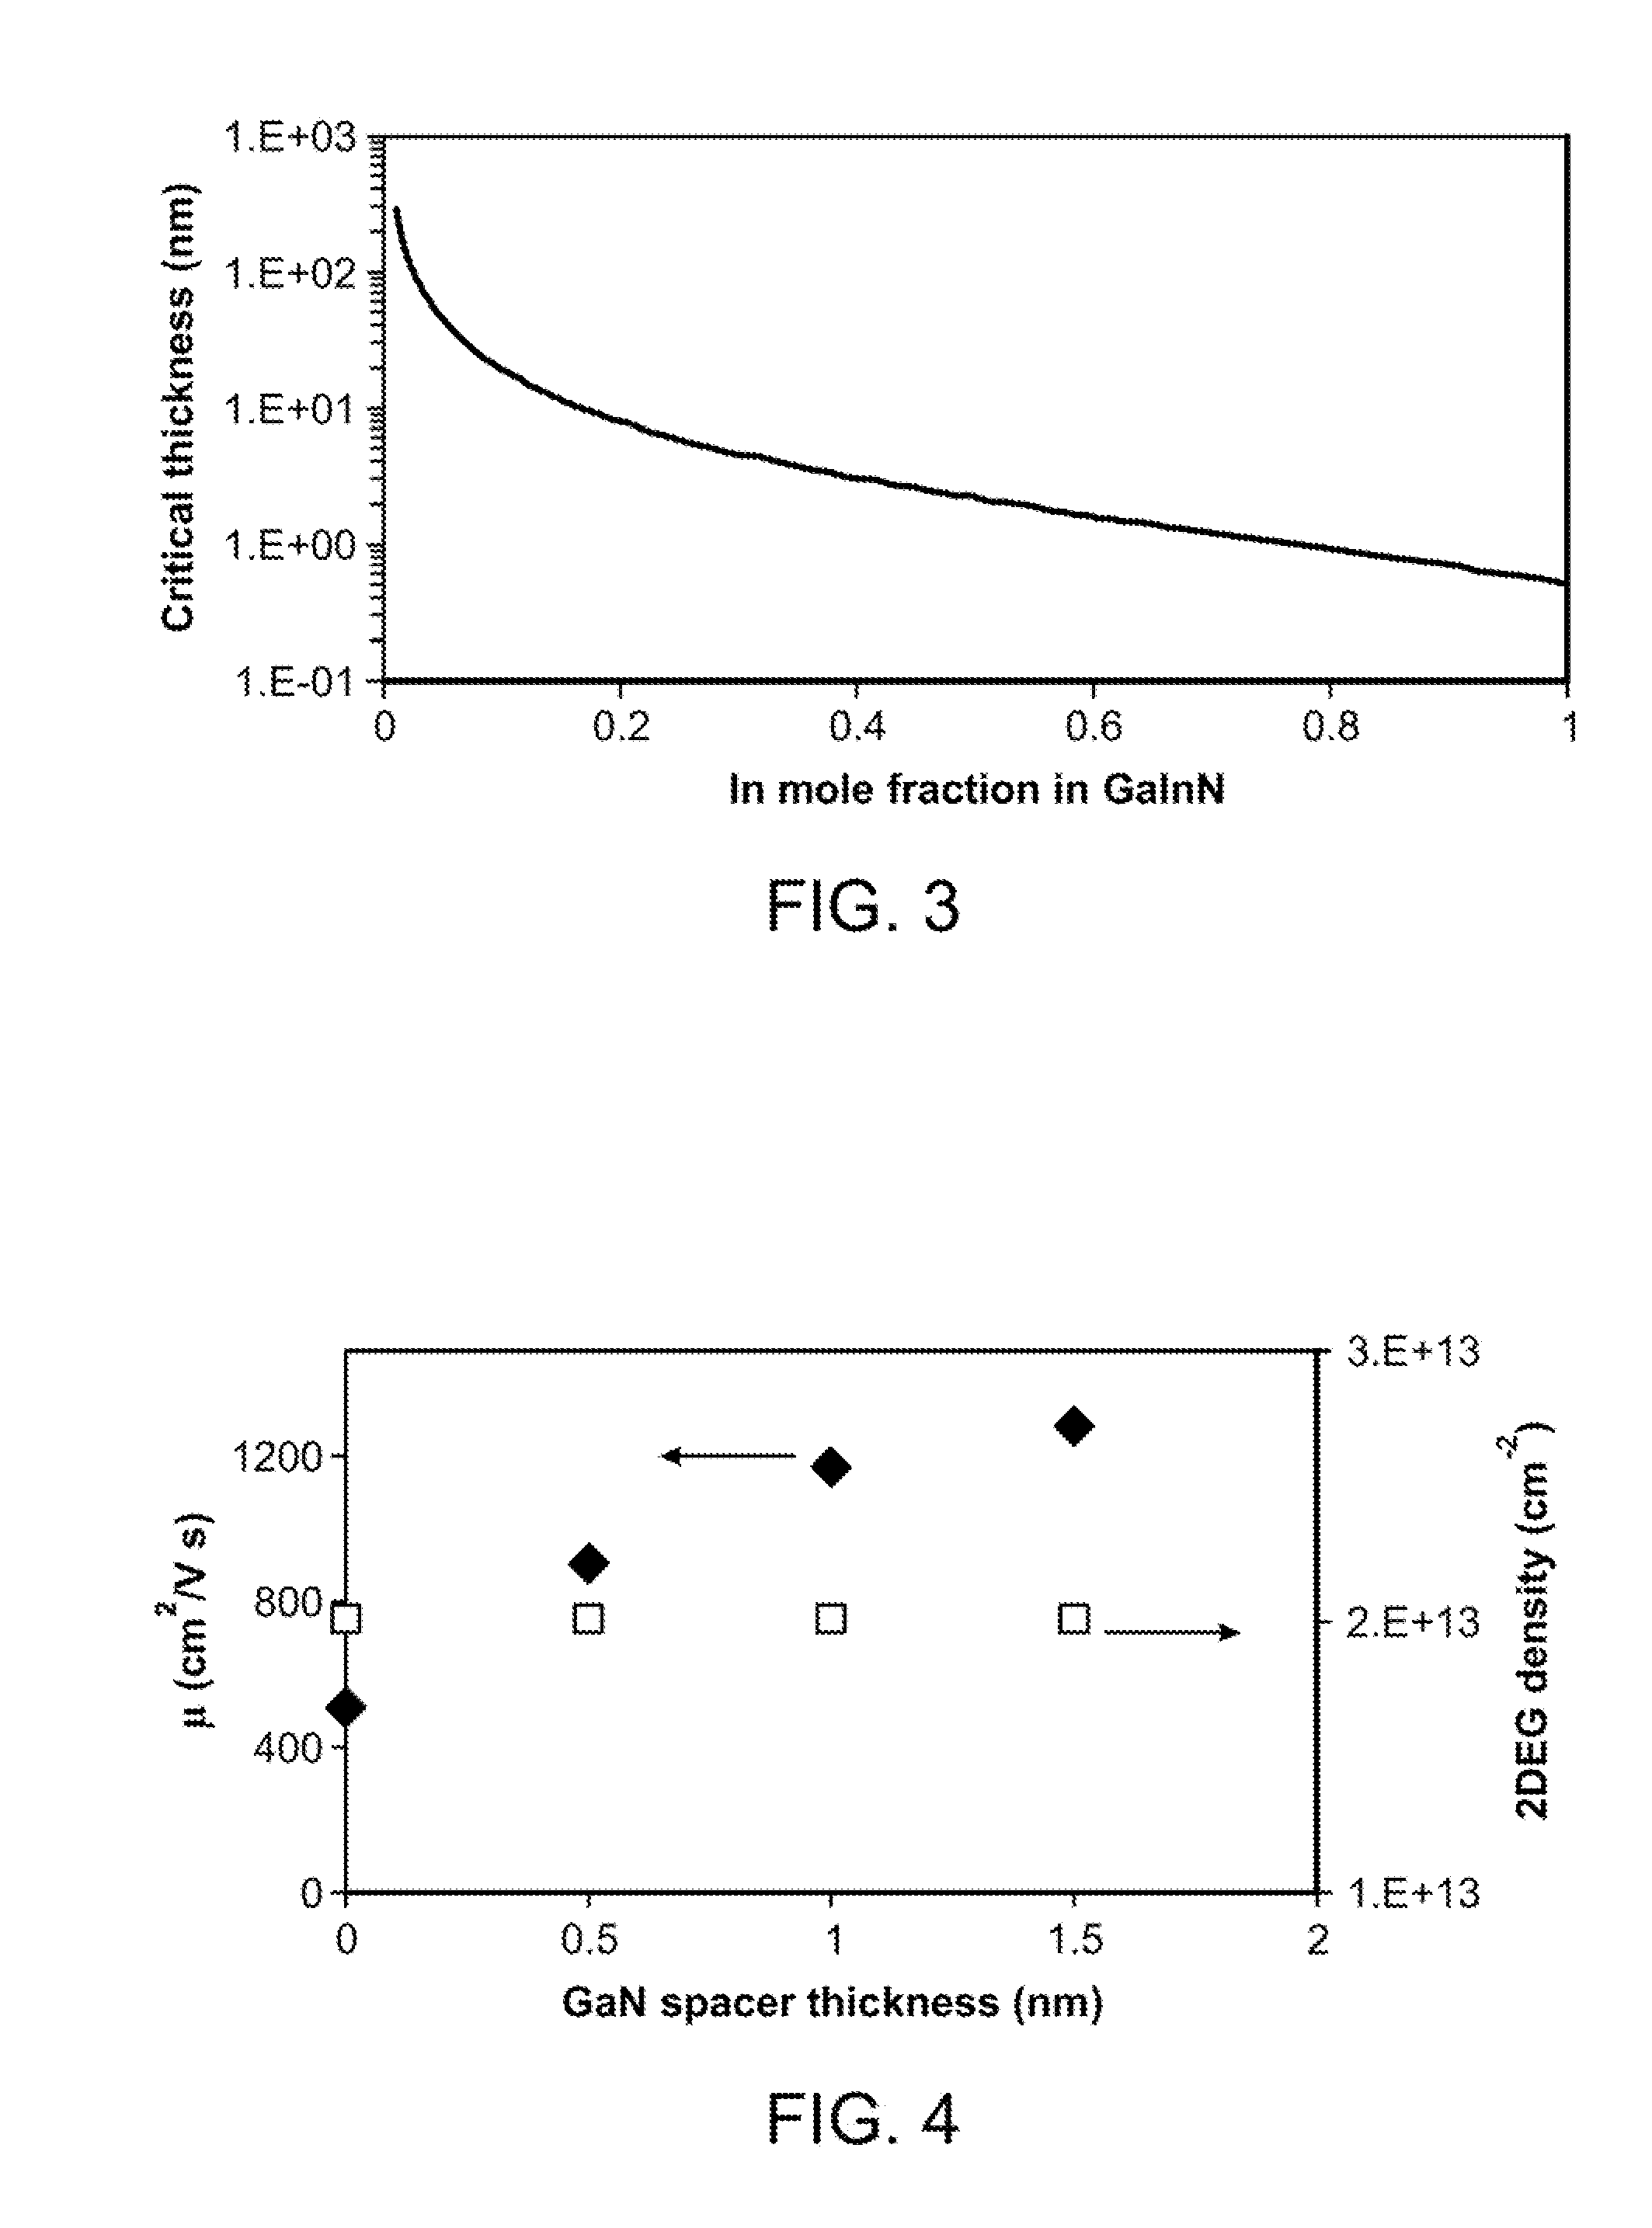 InGaN-Based Double Heterostructure Field Effect Transistor and Method of Forming the Same